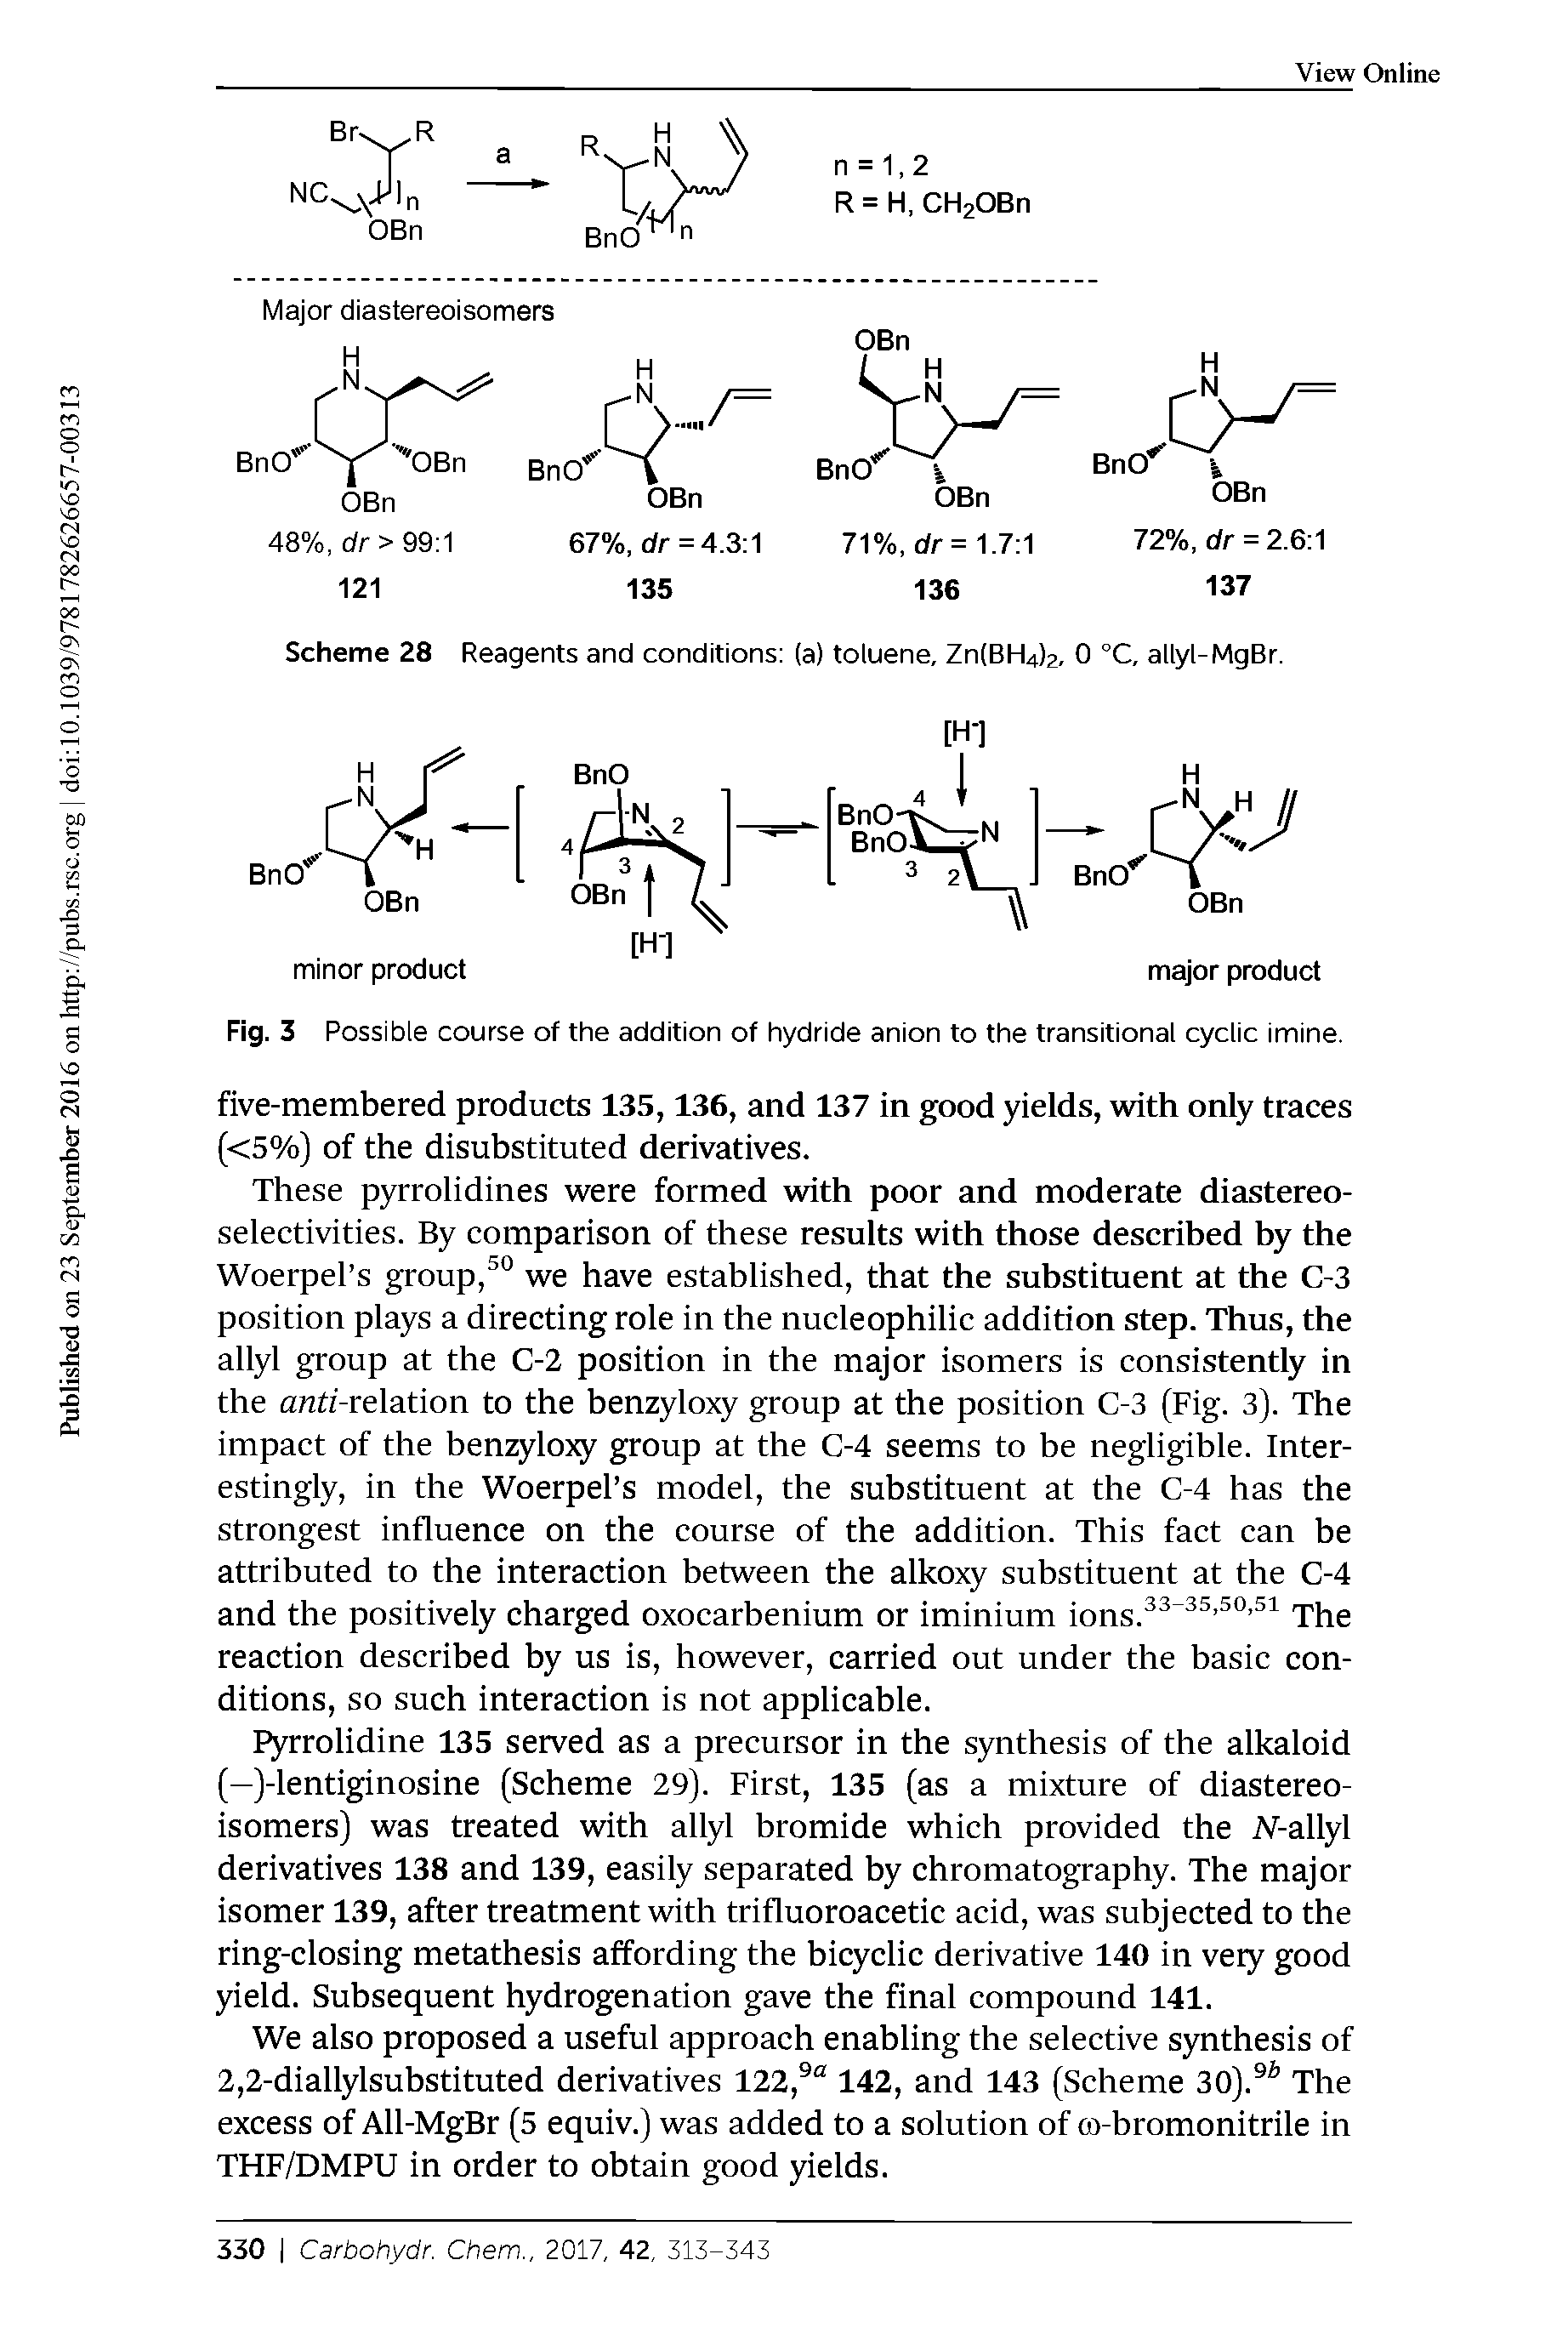 Fig. 3 Possible course of the addition of hydride anion to the transitional cyclic imine.